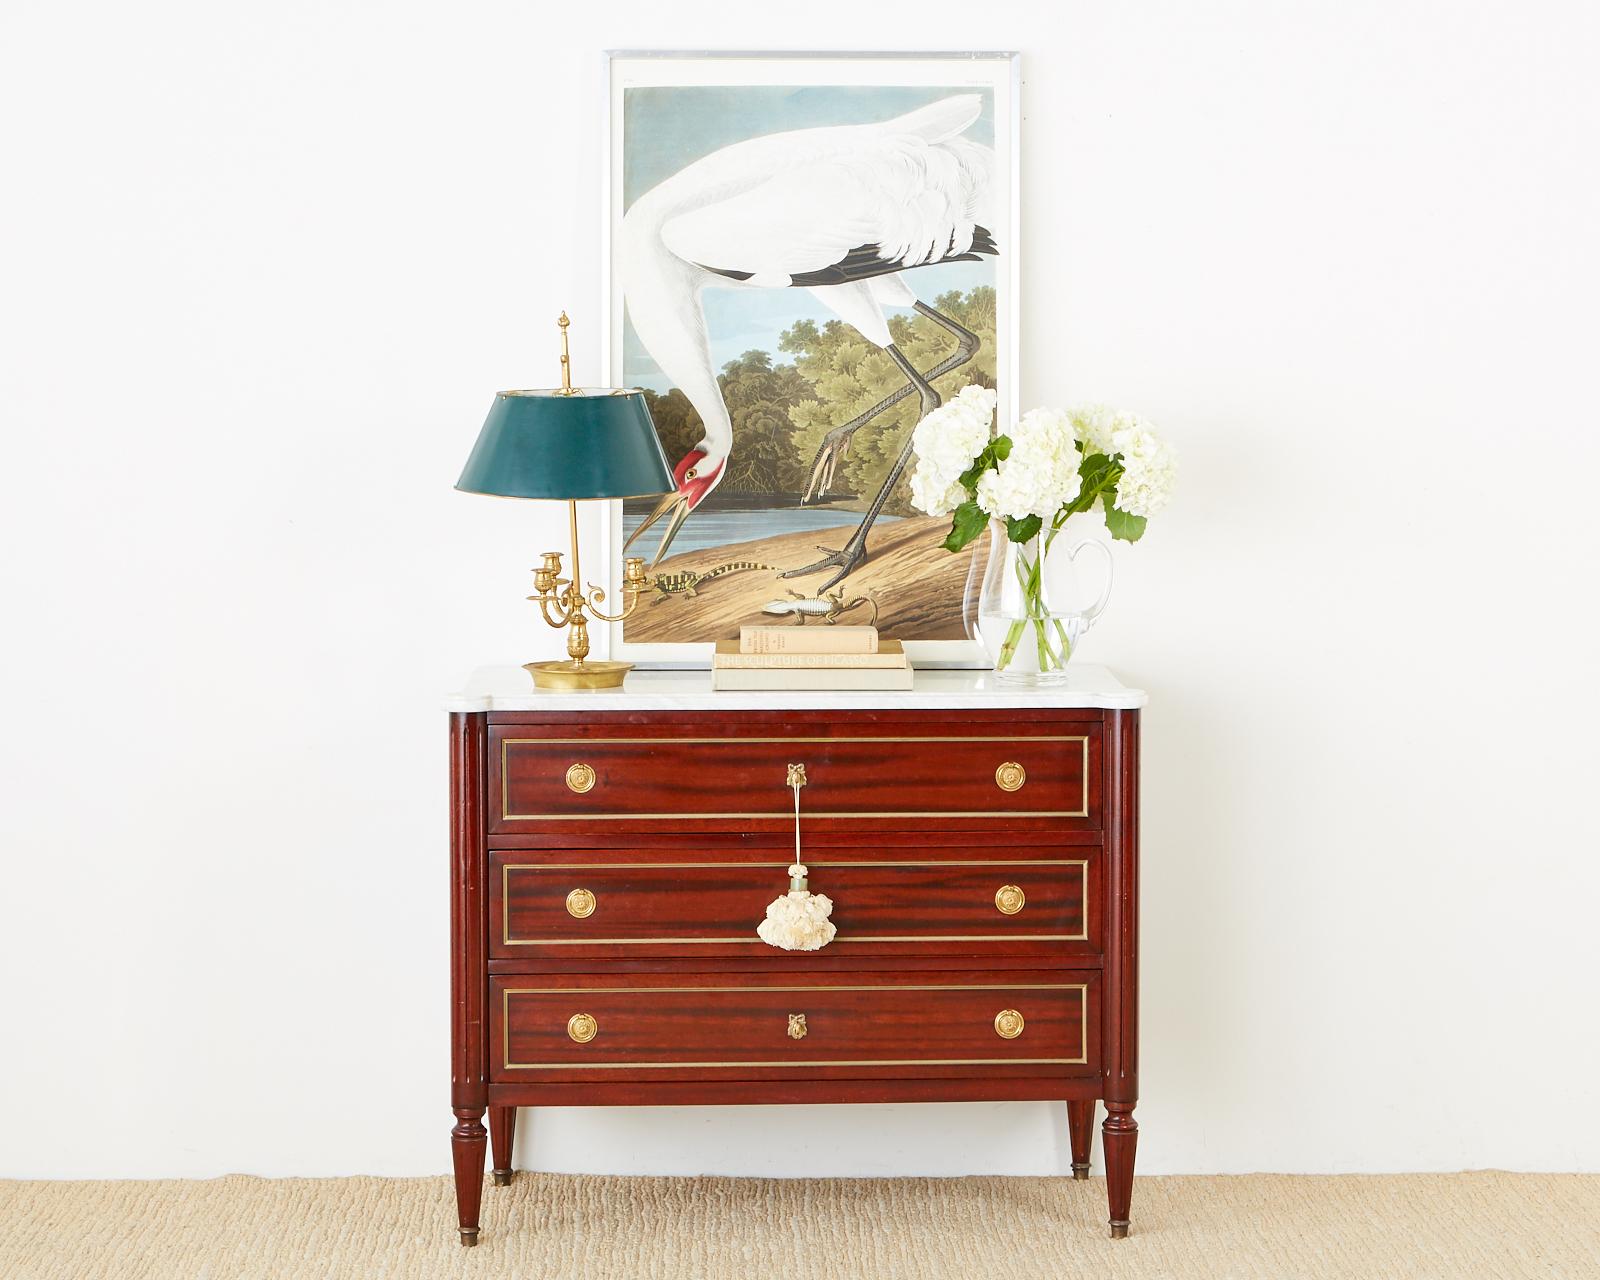 Fine French mahogany commode, chest of drawers, or dresser featuring a dramatic conforming Carrara marble top. The beautifully crafted case is fronted by three large storage drawers with bronze trim and brass pulls. Each side is pilastered with a